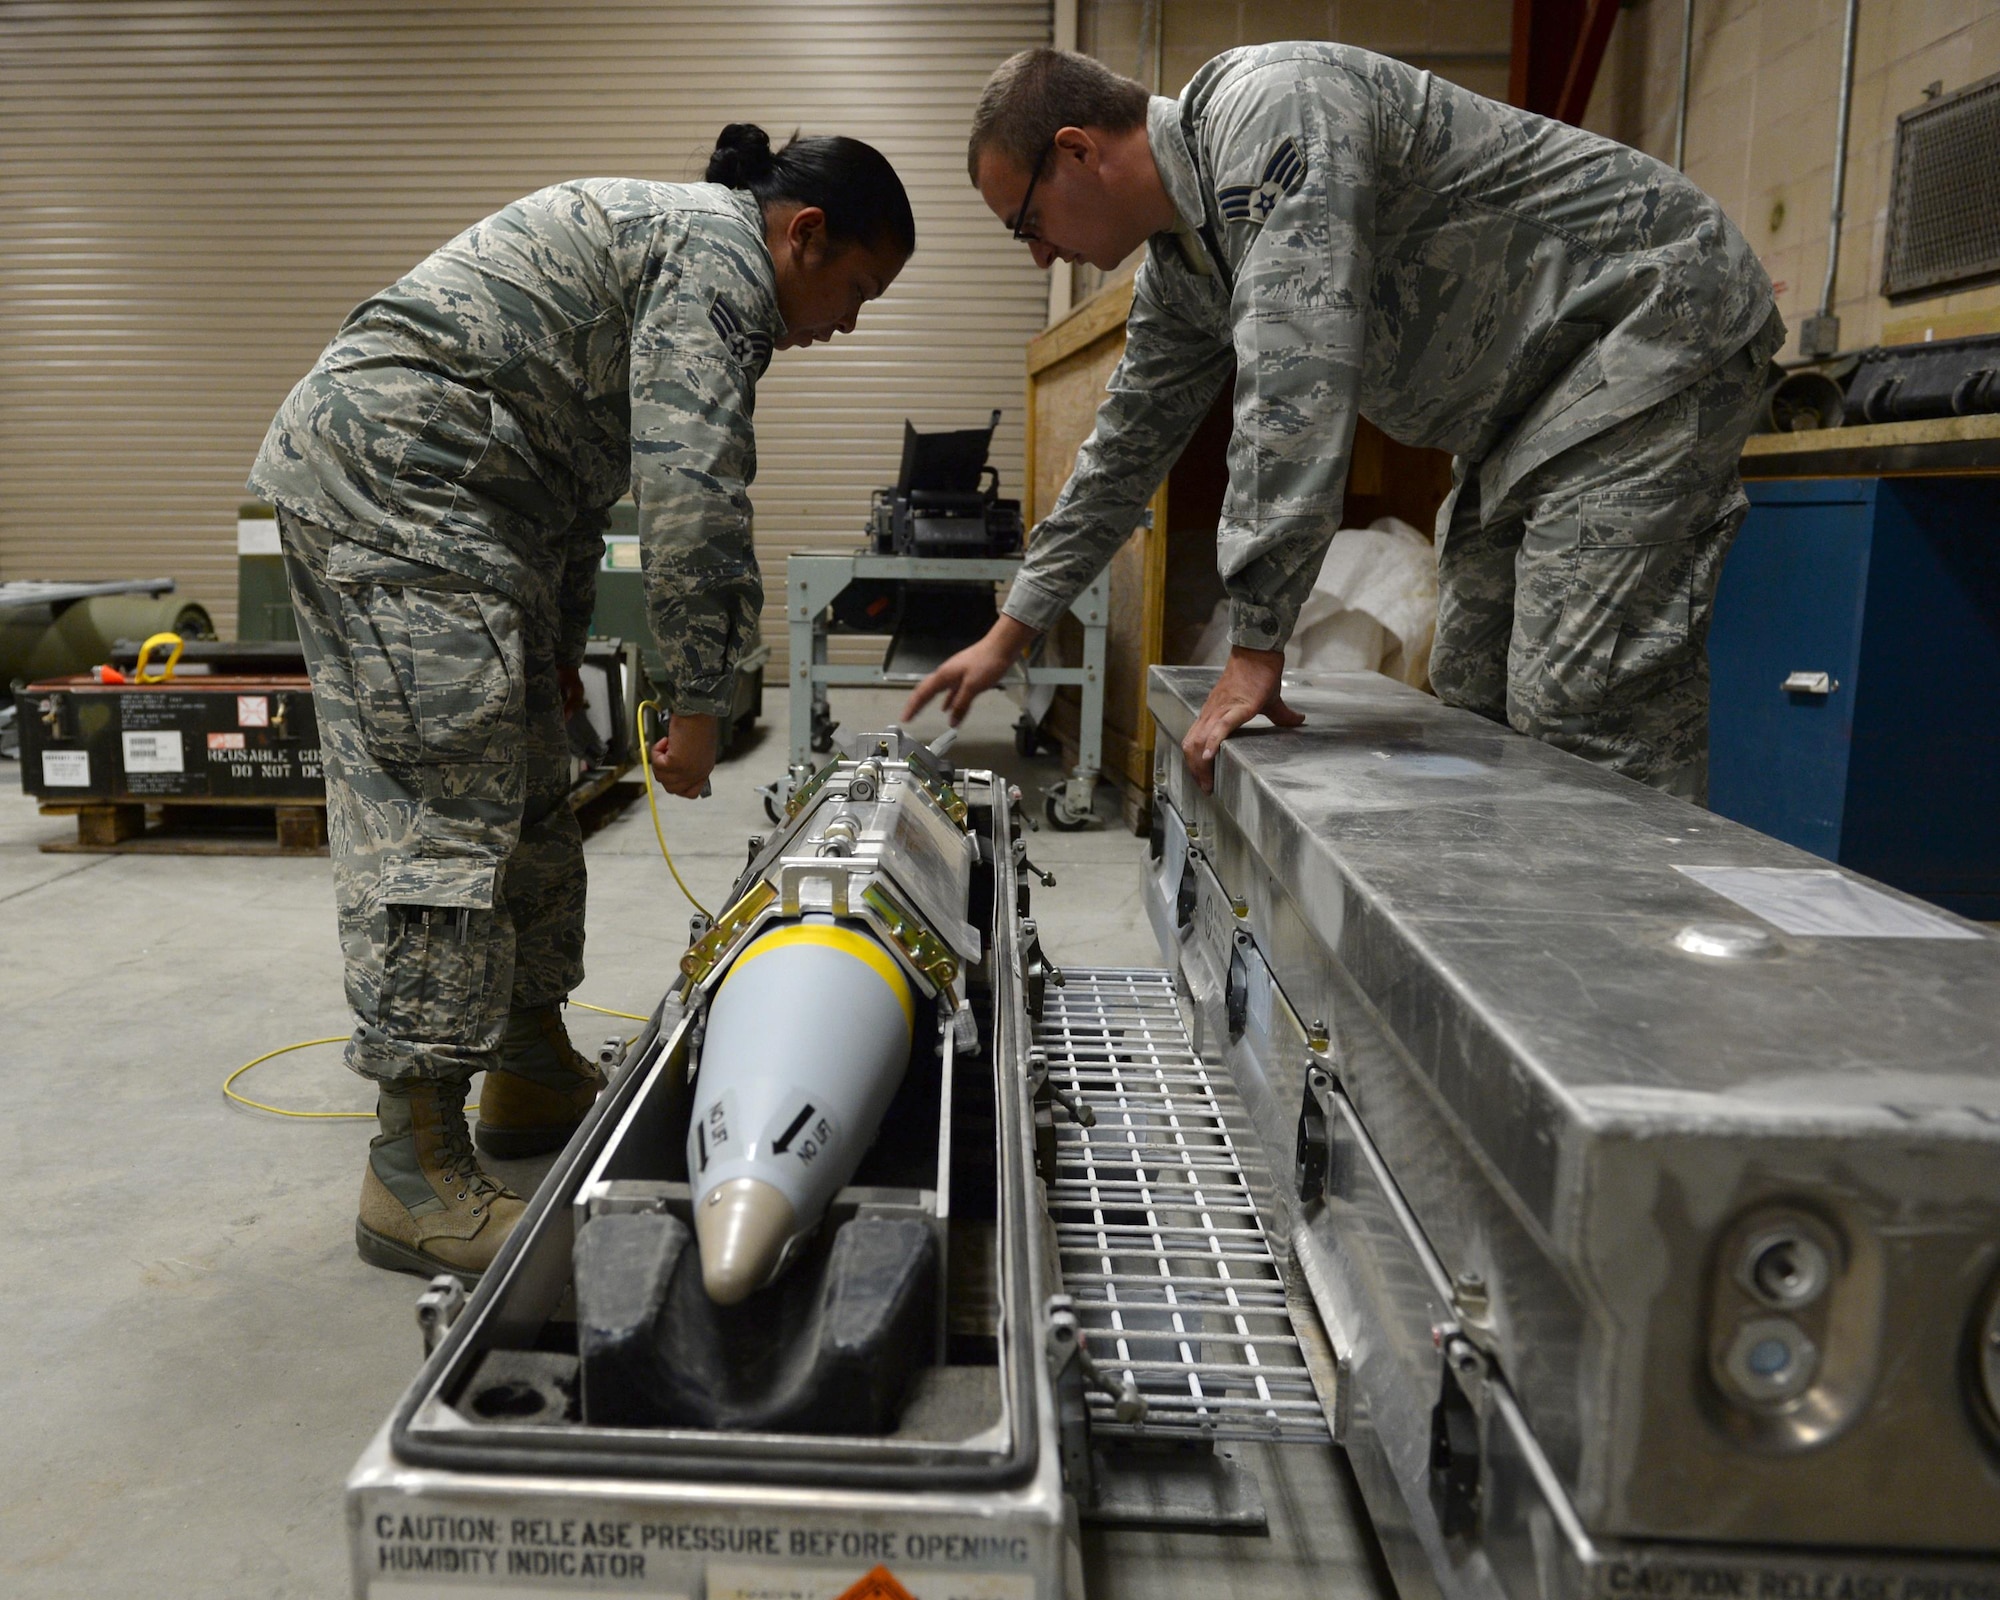 U.S. Air Force Senior Airmen Andrew Tree and Loreal Duque, 325th Maintenance Squadron munitions systems specialists, perform software update maintenance on a weapon system at Tyndall Air Force Base, Fla., Oct. 4, 2016. Munitions can be optimized by software upgrades, much like many consumer electronics. Updating the software on the Air Force’s weapons systems is one way the U.S. military maintains air superiority. (U.S. Air Force photo by Airman 1st Class Cody R. Miller/Released)